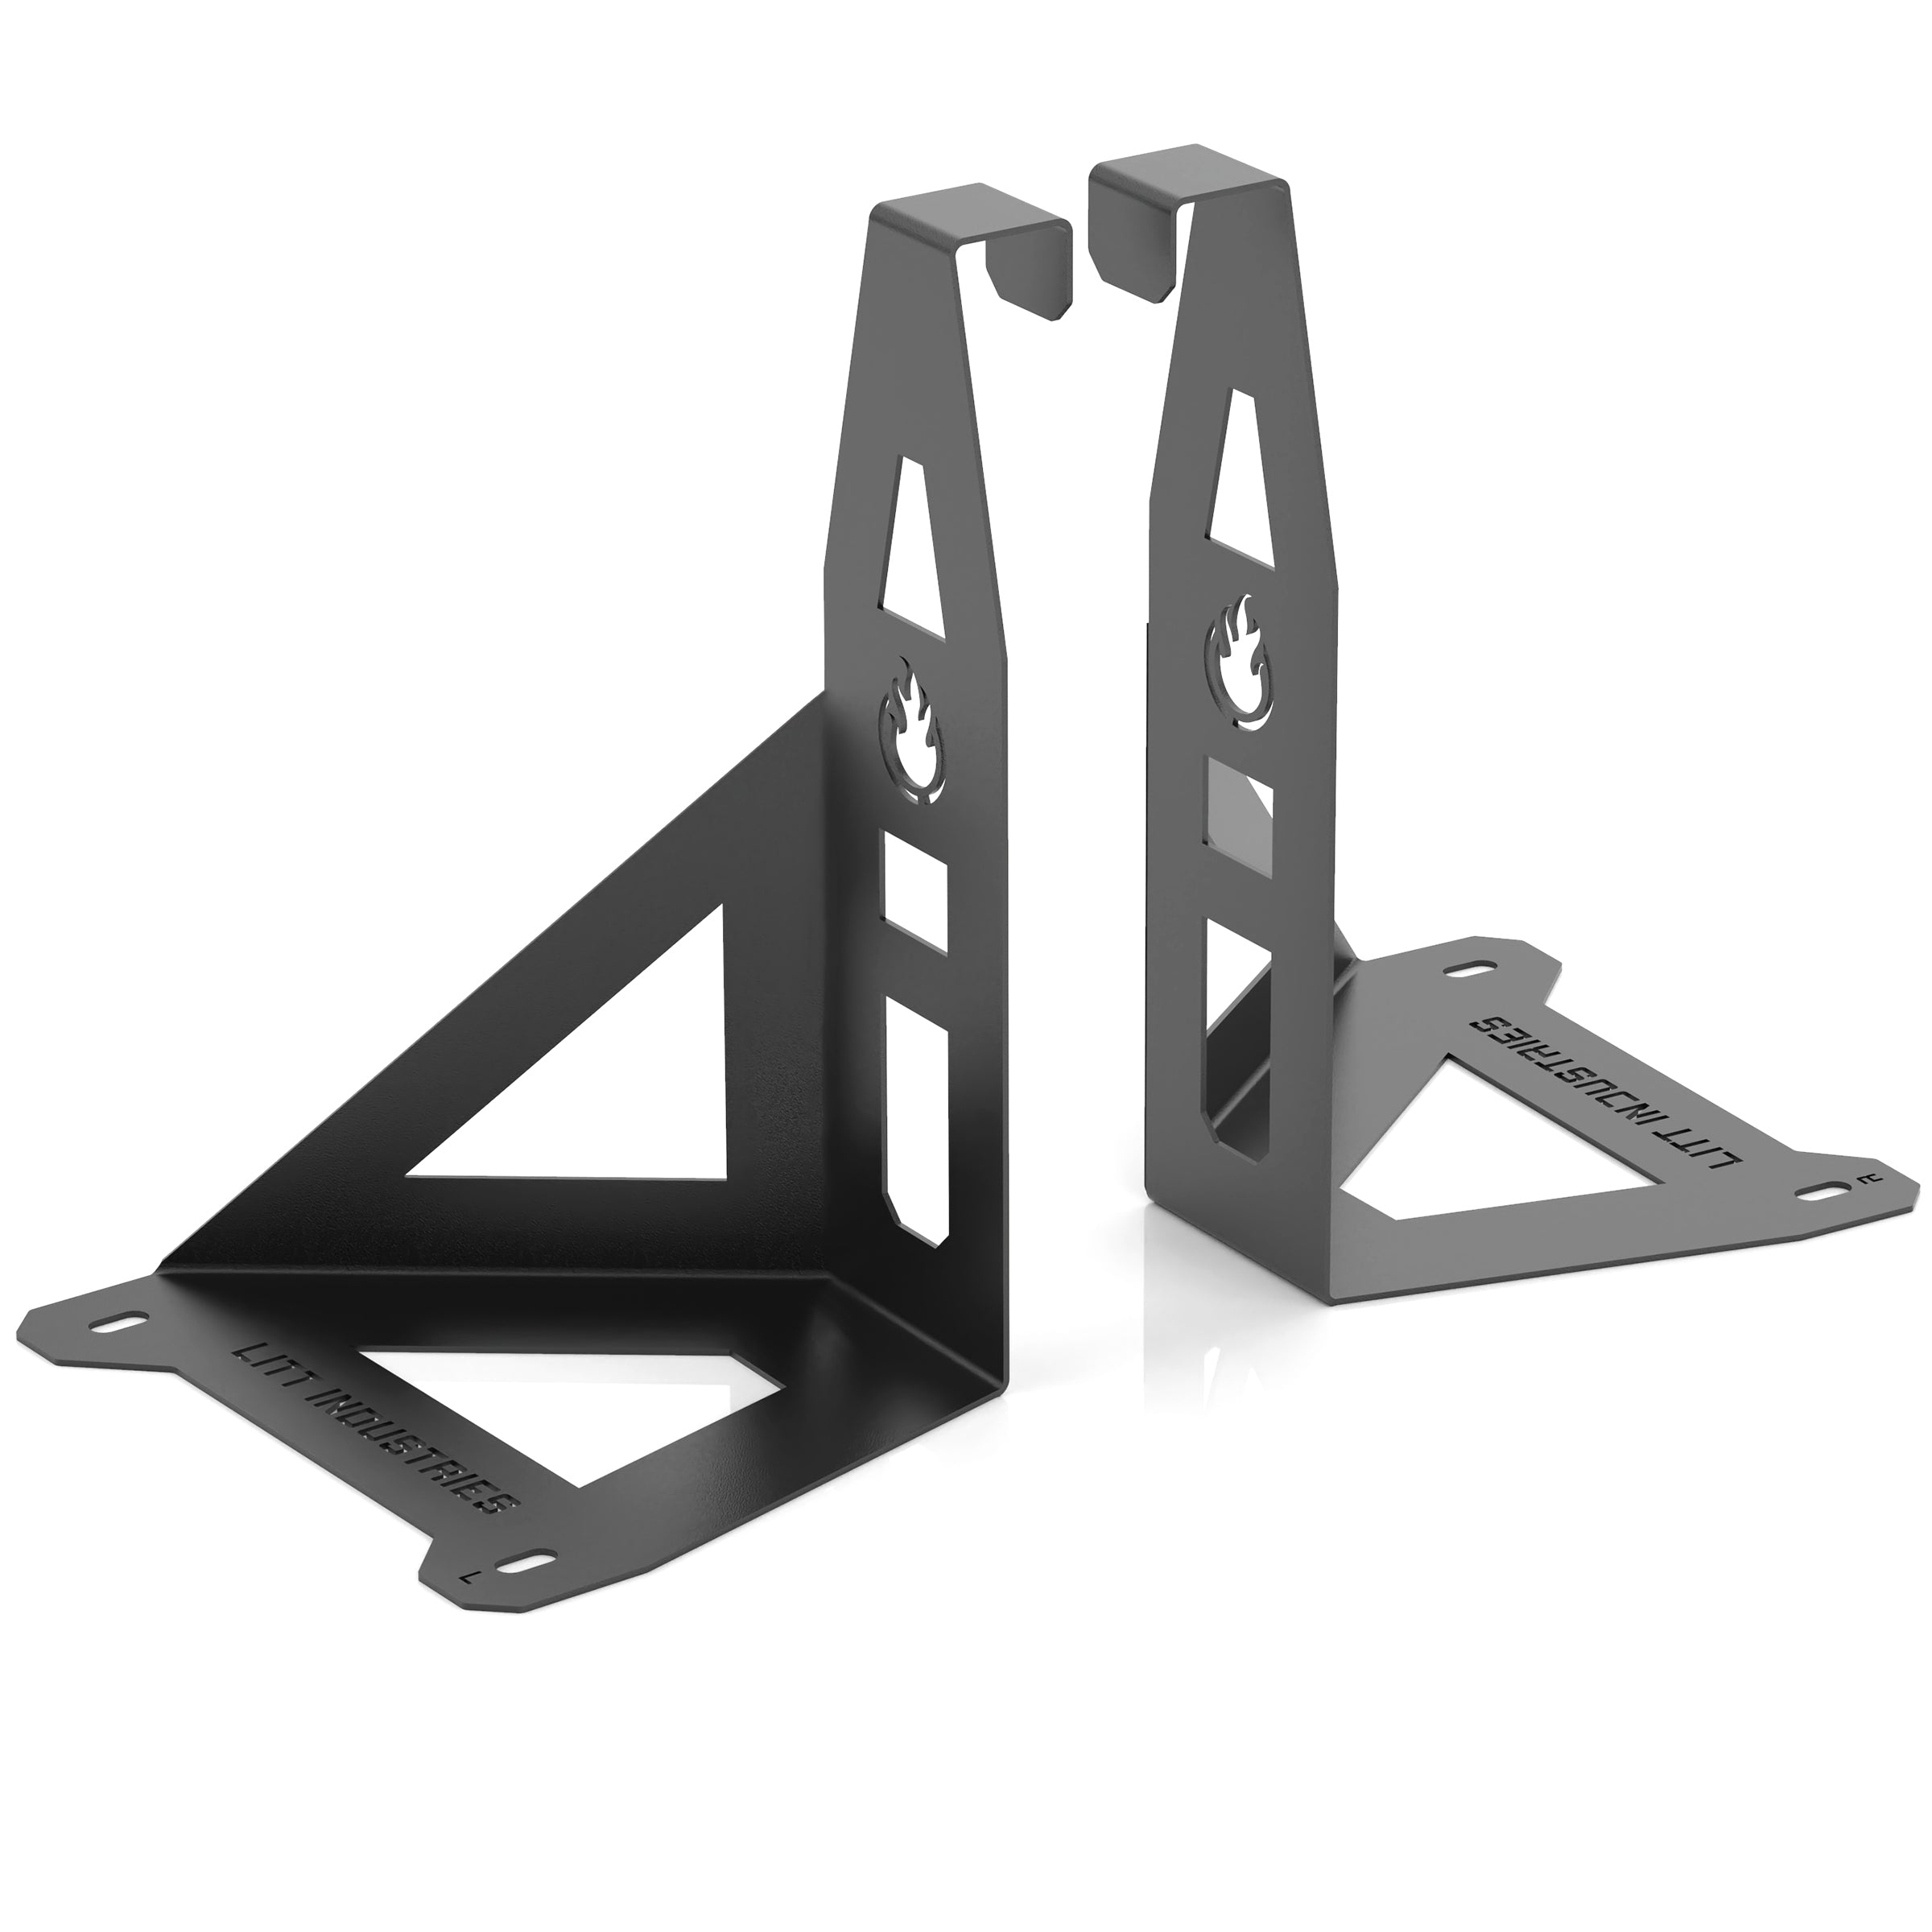 Ozark 35 cooler mounts for RZR 900 - secure and strong mounts for off roading by litt industries